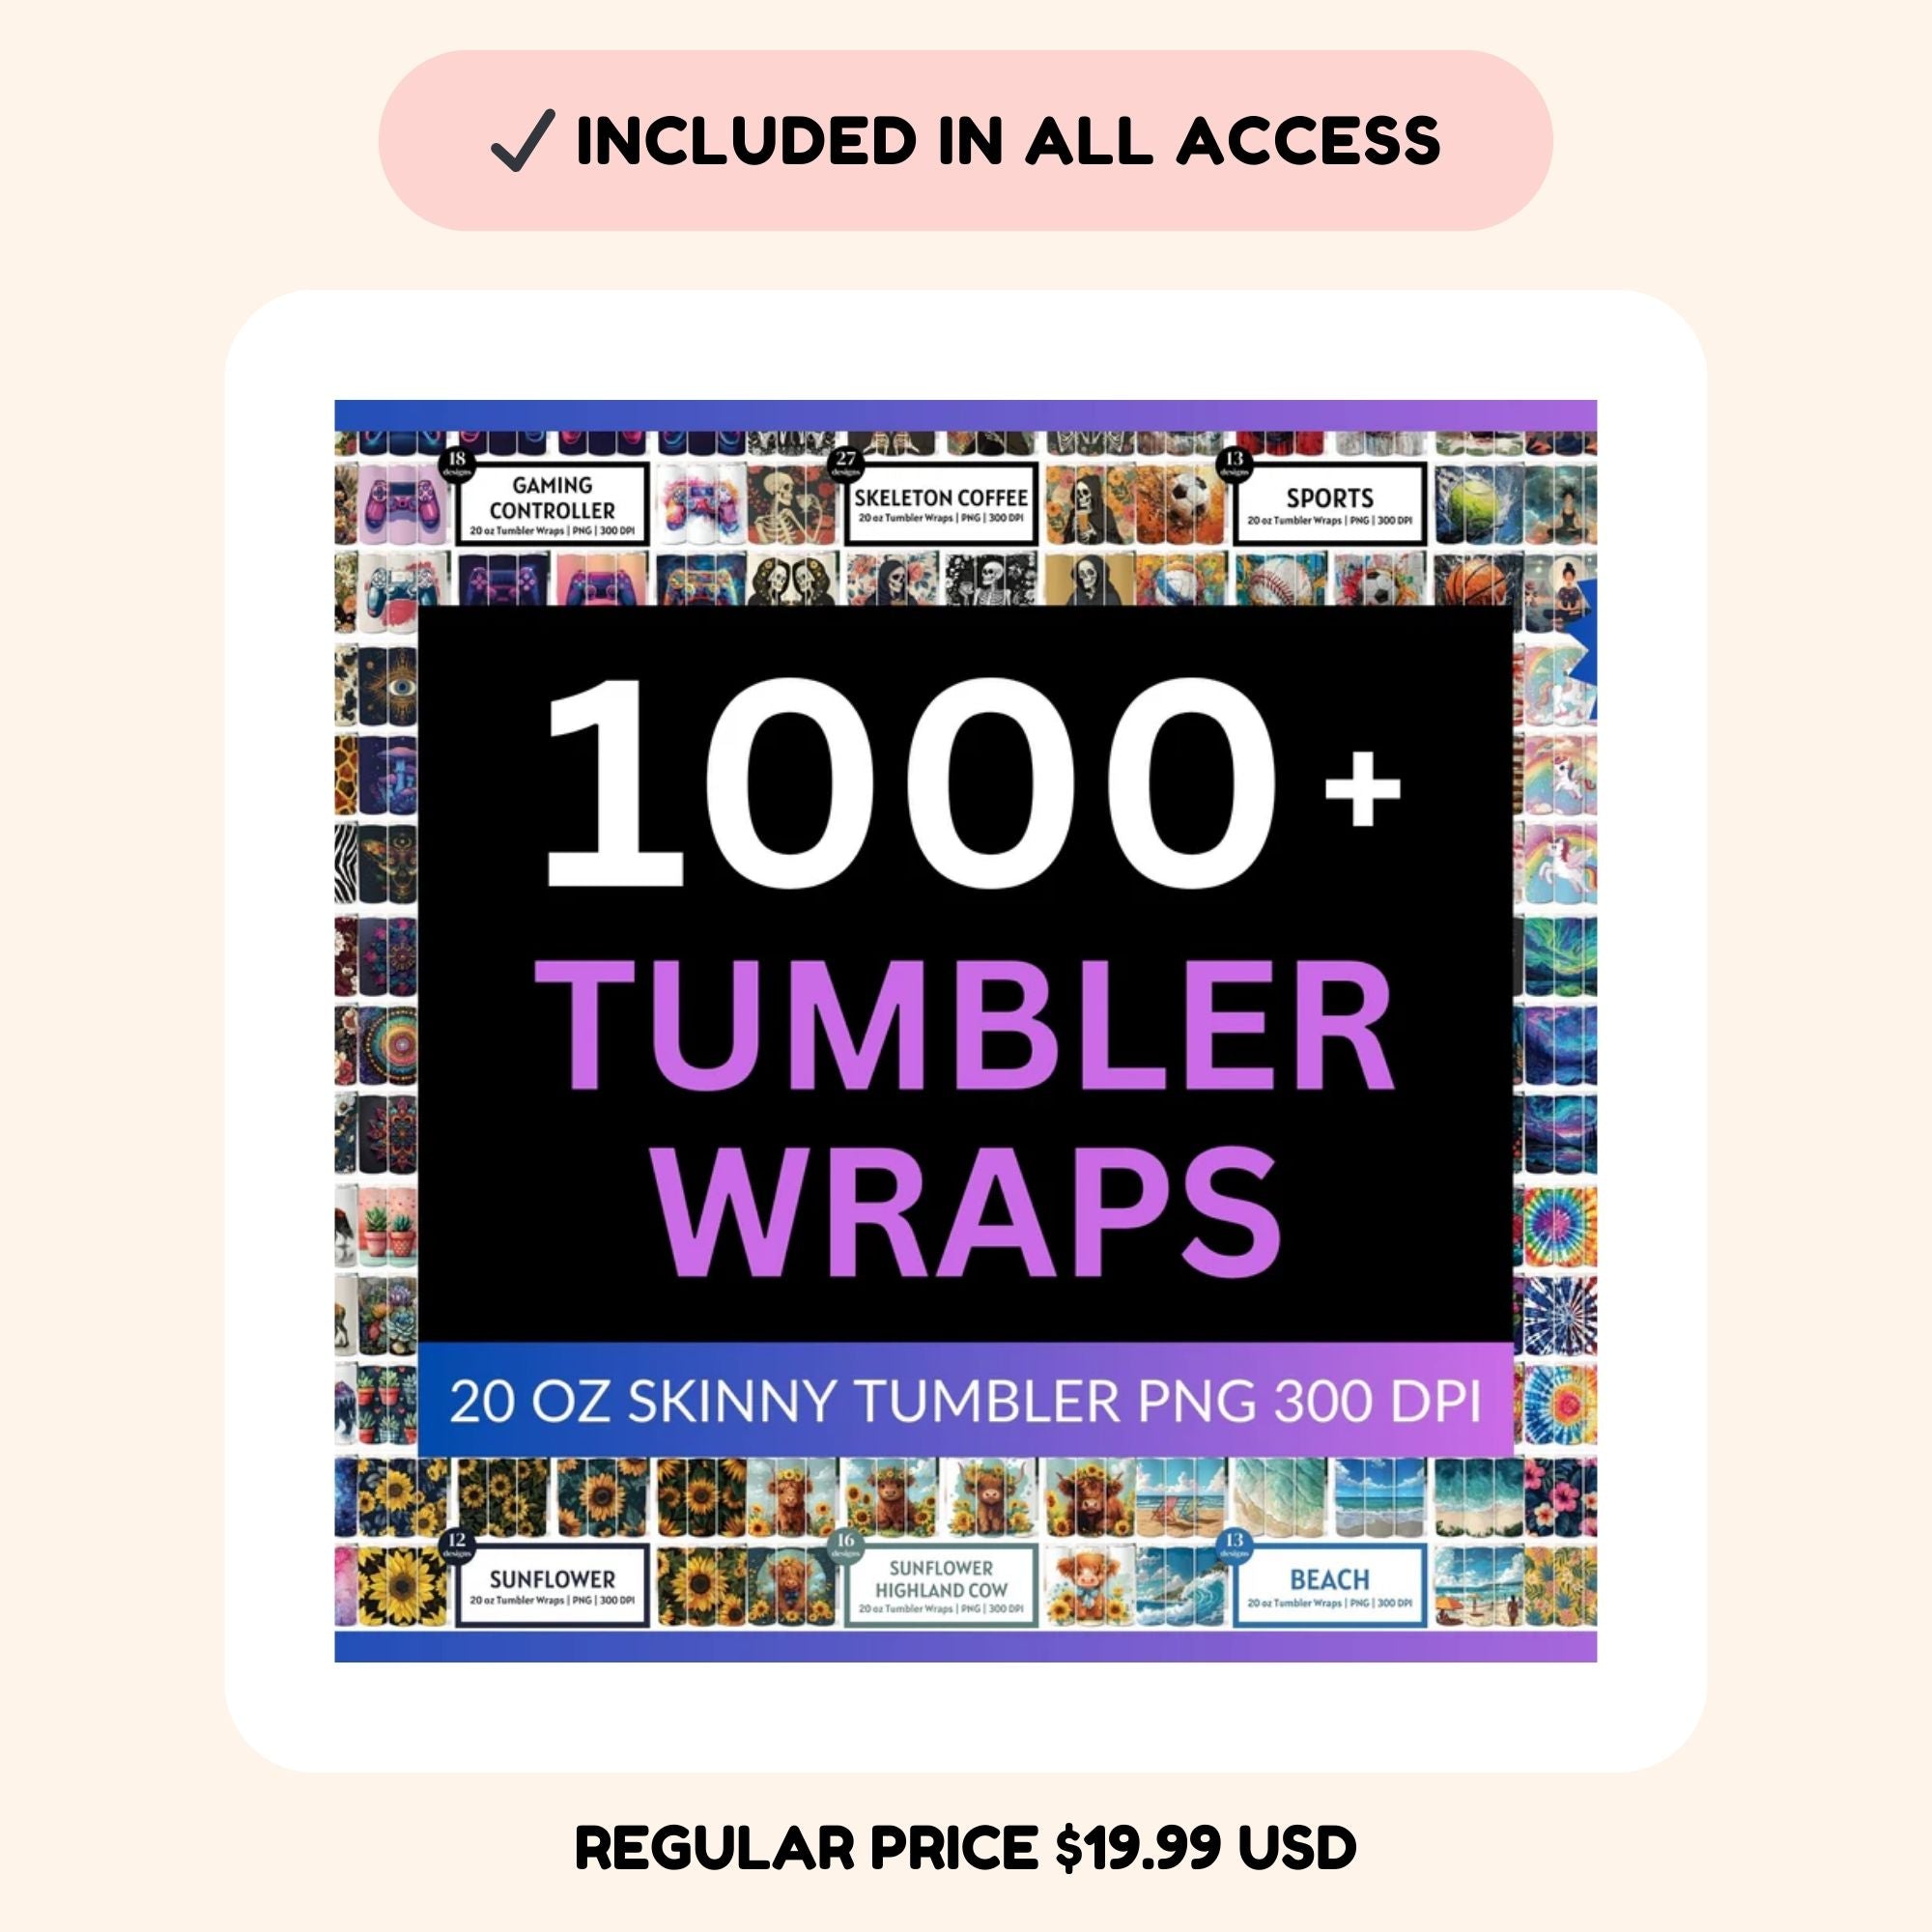 Unlimited Downloads - All Access Pass